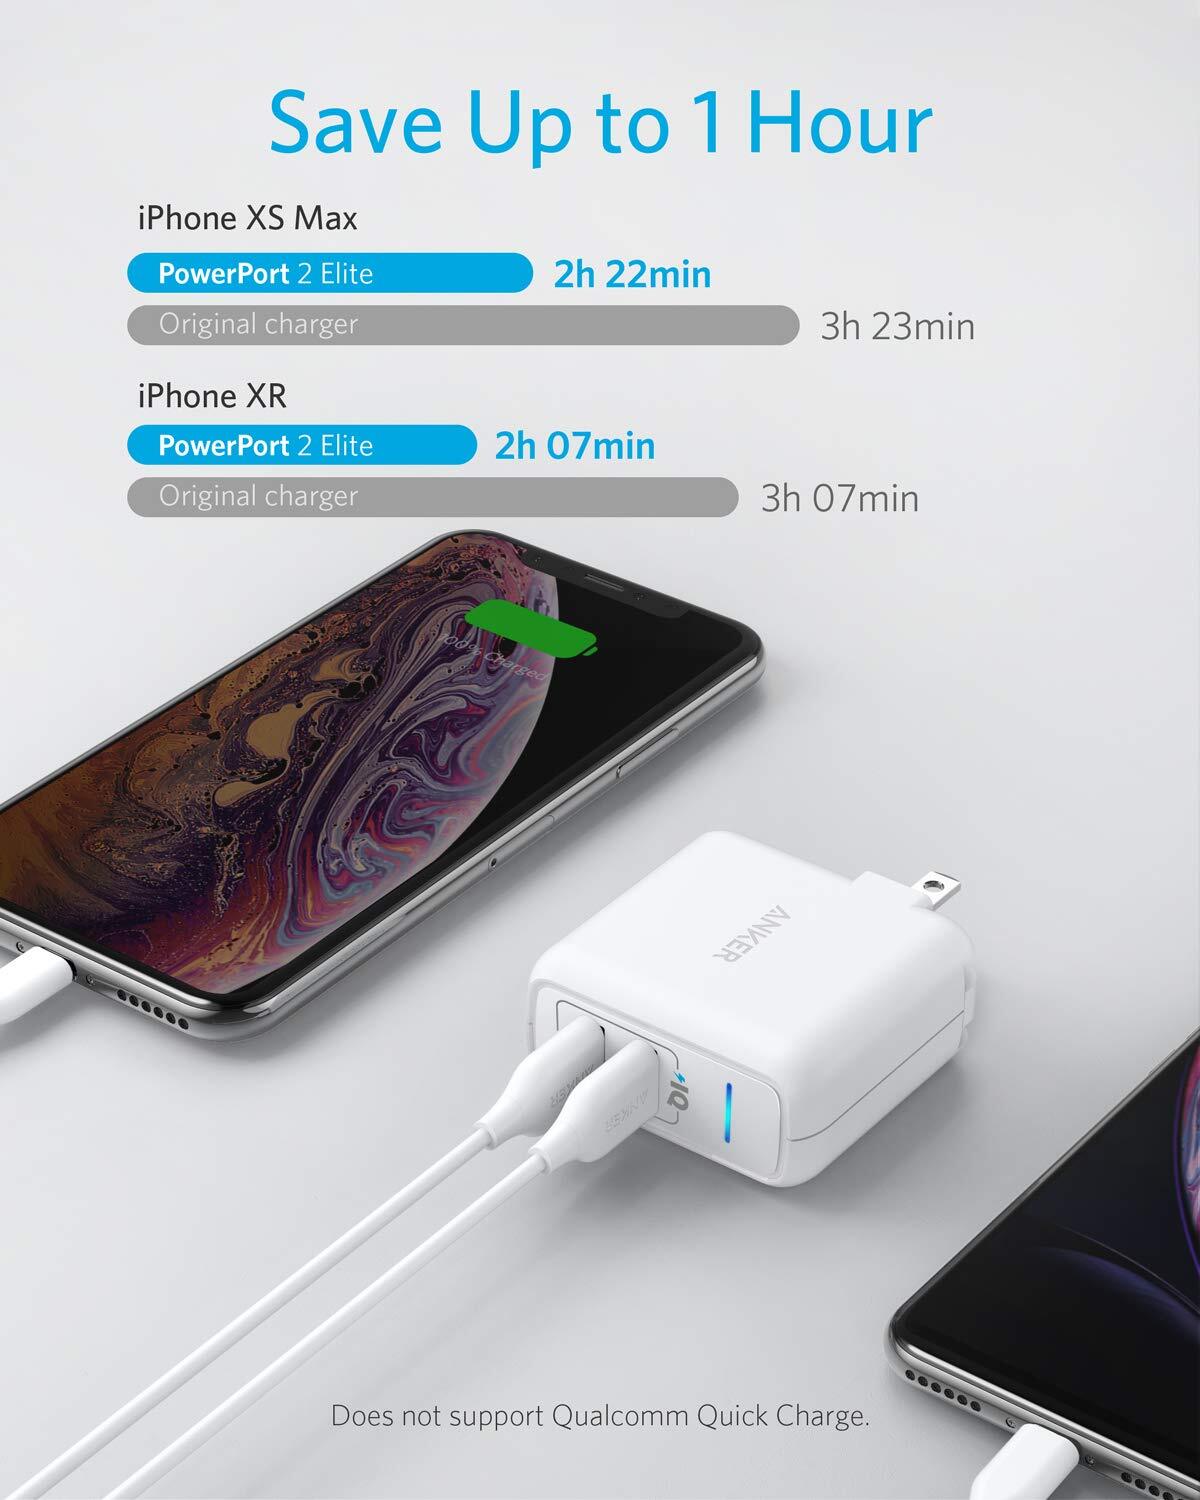 Anker PowerPort II with Dual PowerIQ Ports, 24W-Ultra-Compact Foldable Plug Travel Charger, for iPhone X/8/7/6S/6 Plus, iPad Pro/Air 2/mini 4, Samsung S5, and More-M000000000453 www.mysocially.com